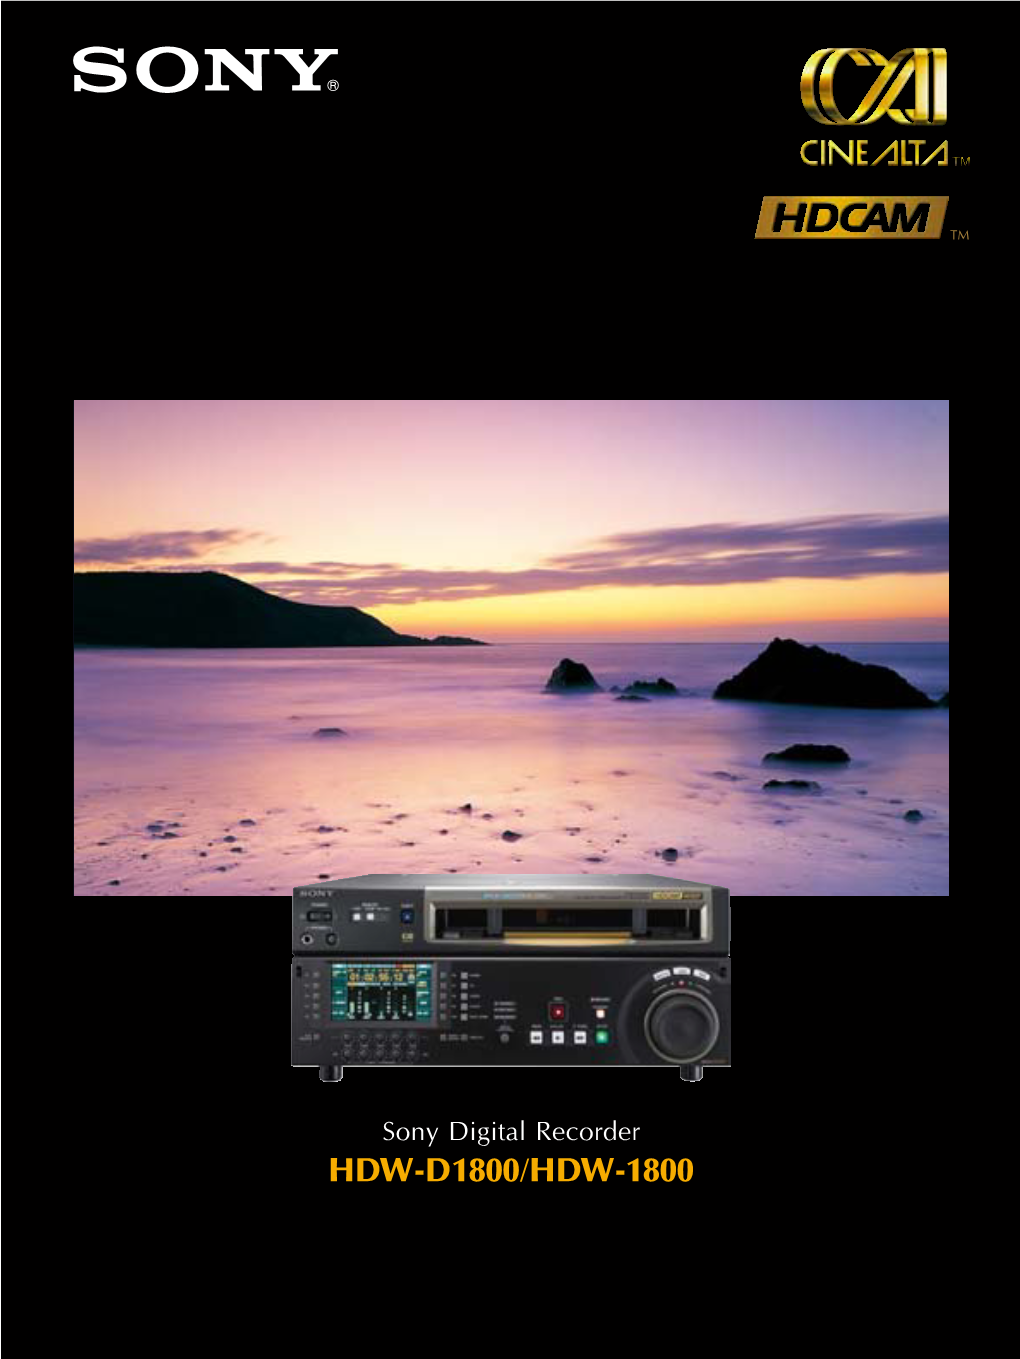 HDW-D1800/HDW-1800 HDW-D1800/1800 HDCAM Studio Recorders – Cost-Effective Solutions for an Even Broader Spectrum of HD Opportunities